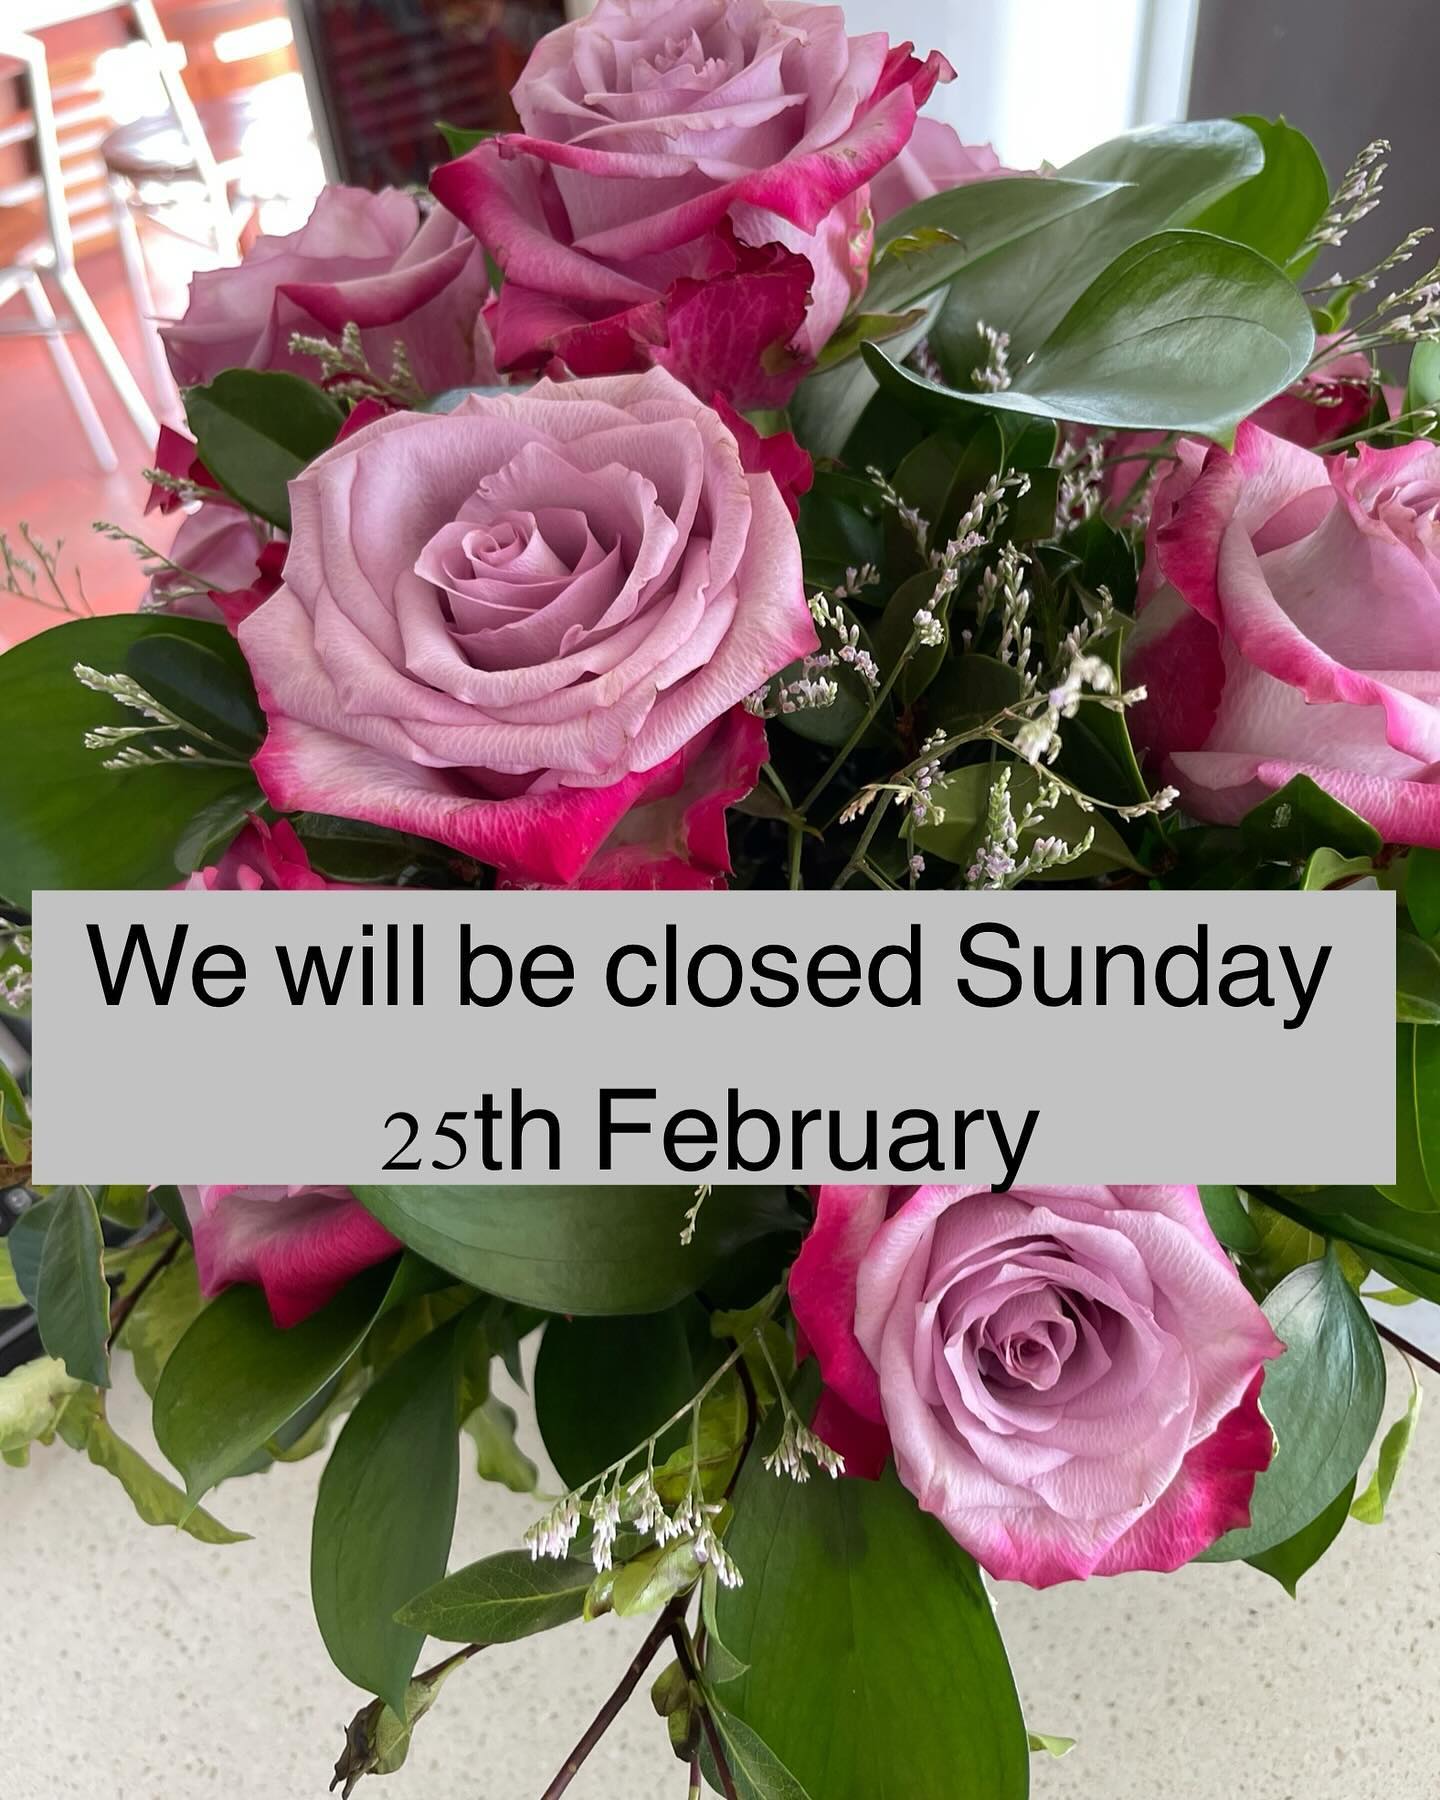 We will be closed Sunday 25th February. Back to normal hours Monday 26th. Apologies for inconvenience.